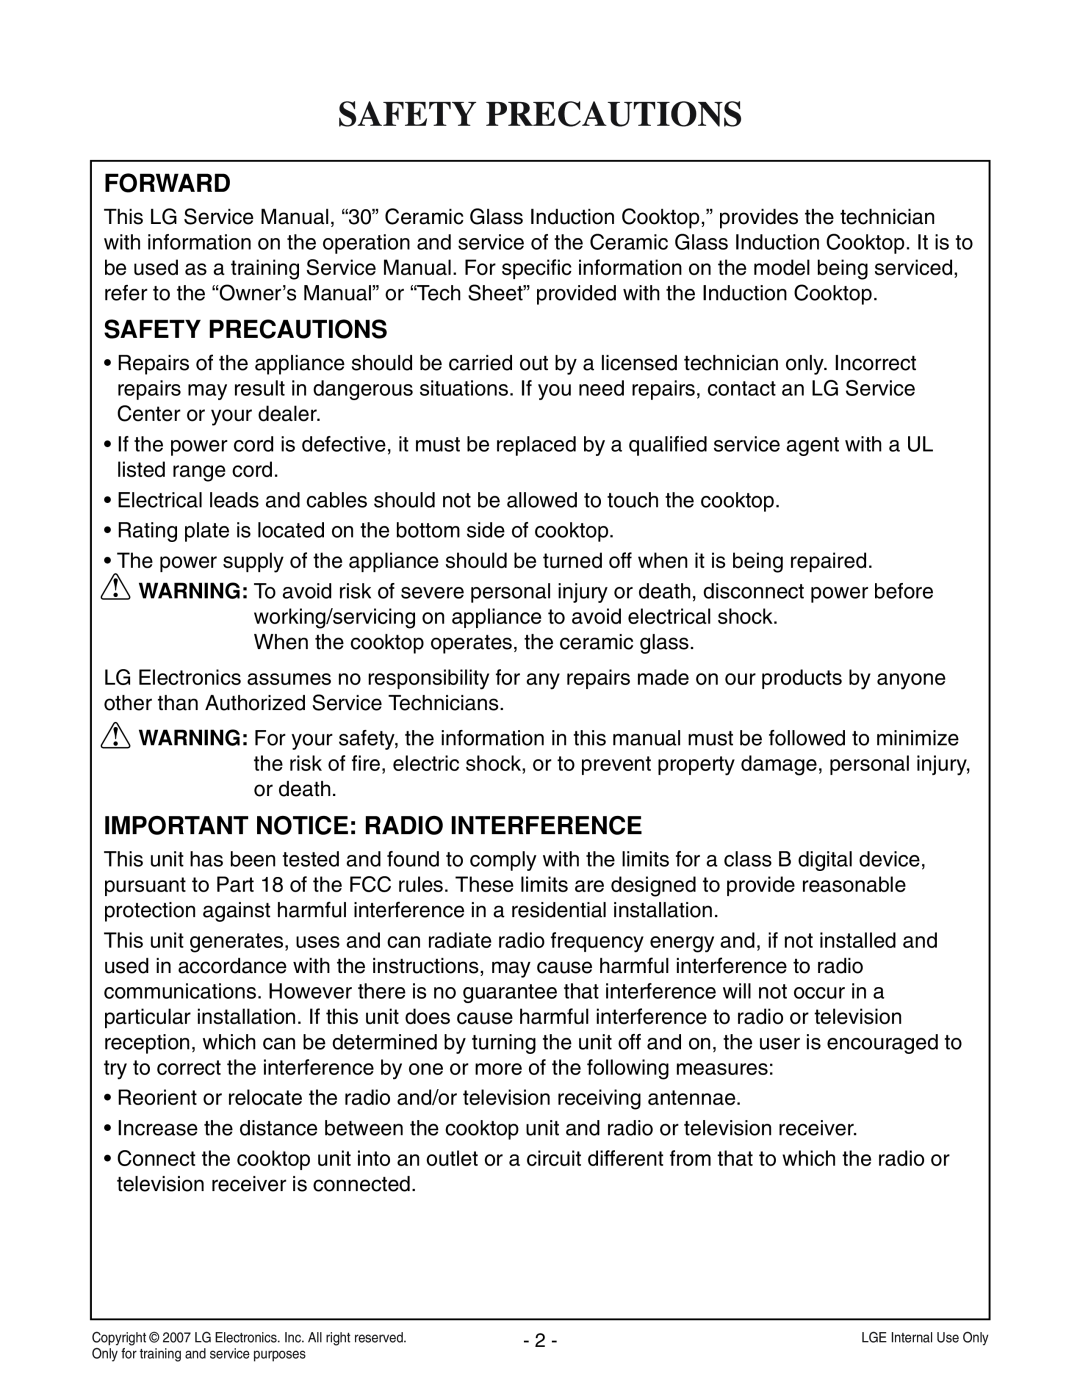 LG Electronics LCE30845 service manual Safety Precautions, Forward, Important Notice Radio Interference 